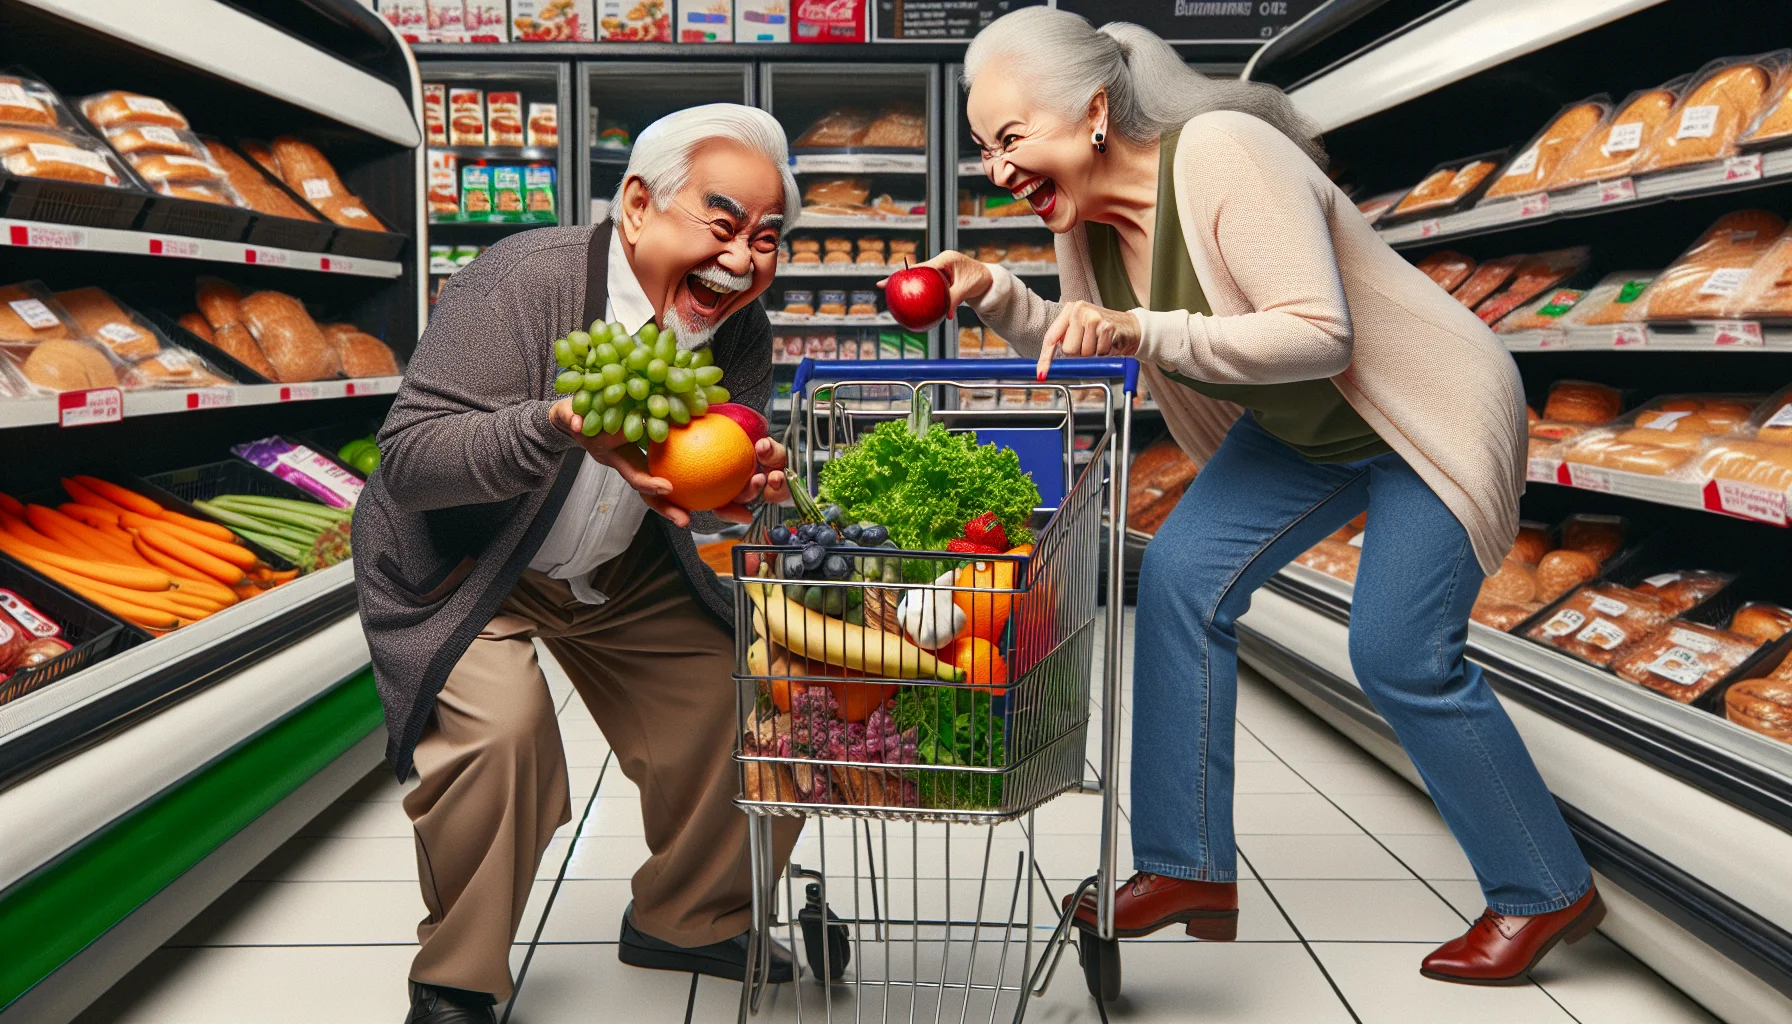 Create a humorous yet realistic image of an elderly South Asian man and an elderly Caucasian woman partaking in a humorous situation in a grocery store. The elderly man is seen juggling fresh fruits and vegetables in the produce section, while the woman mischievously swaps her friend's shopping cart filled with pastries and junk food with one filled with leafy greens and whole grain products. They are both portrayed laughing, emphasizing the funny situation and promoting healthy eating habits among seniors.